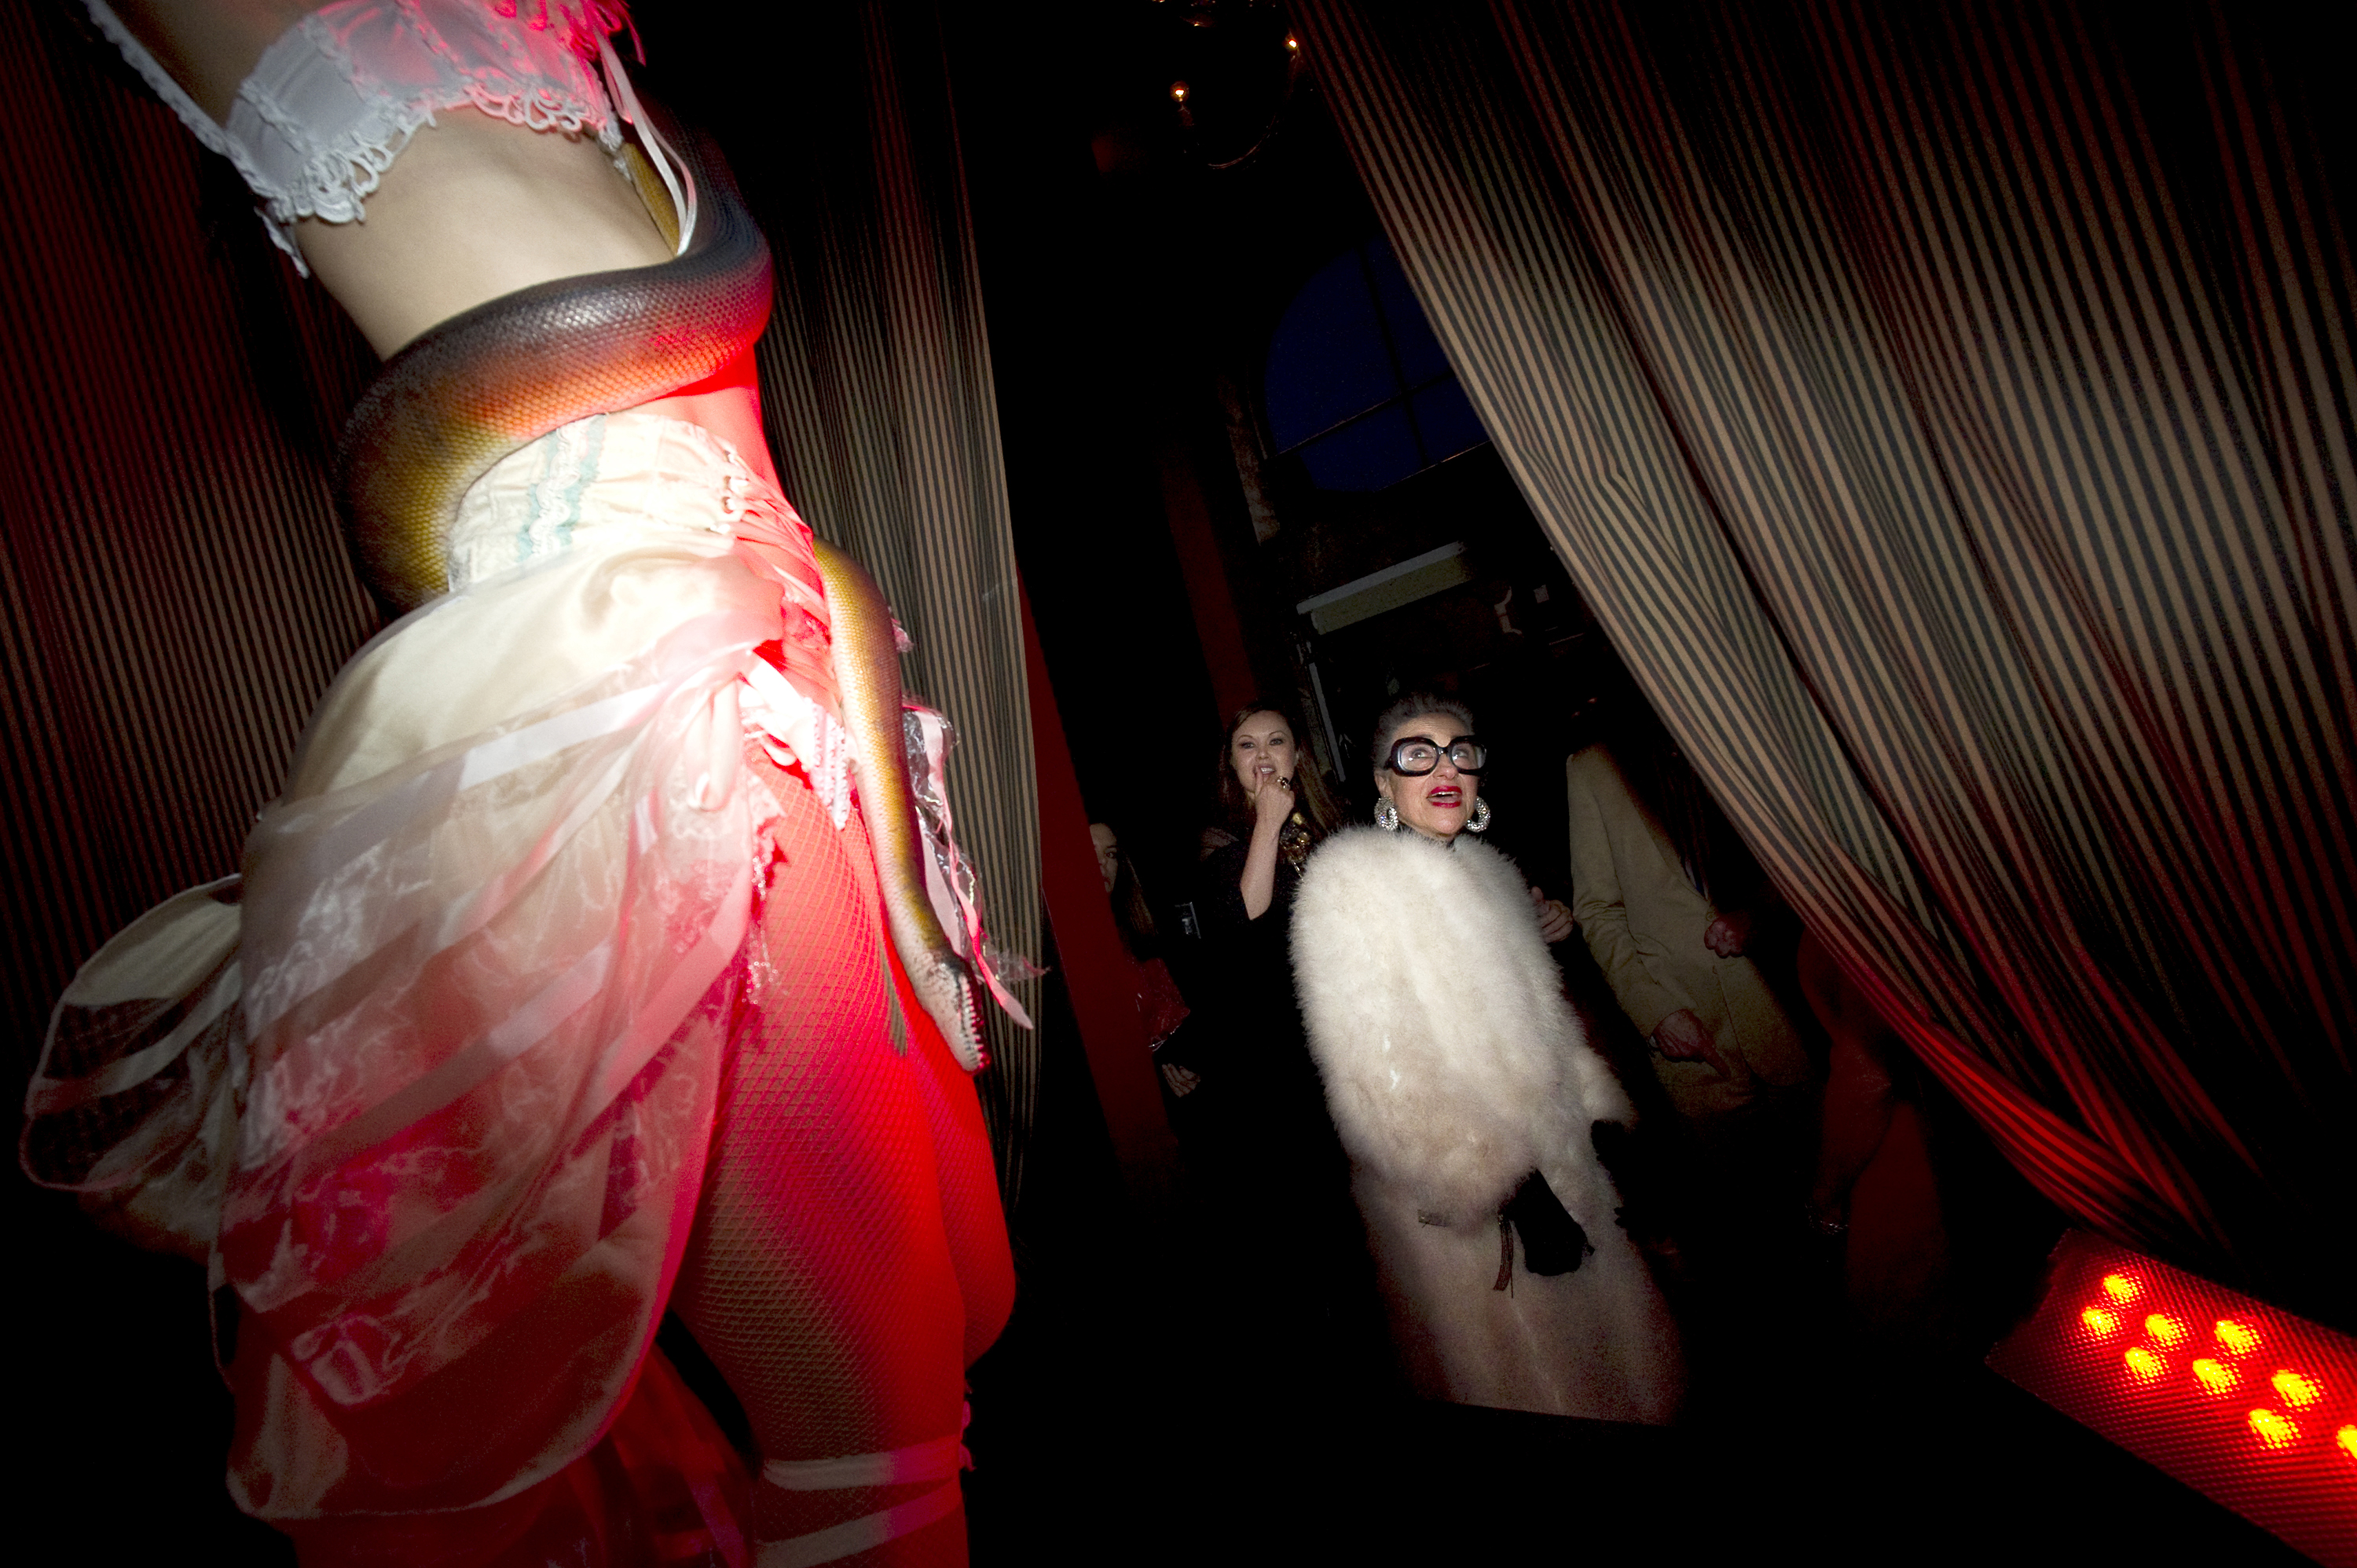 A performer in lingerie with a snake around their body is illuminated by red light. Onlookers, including a woman in a fur coat and large glasses, watch from the side.